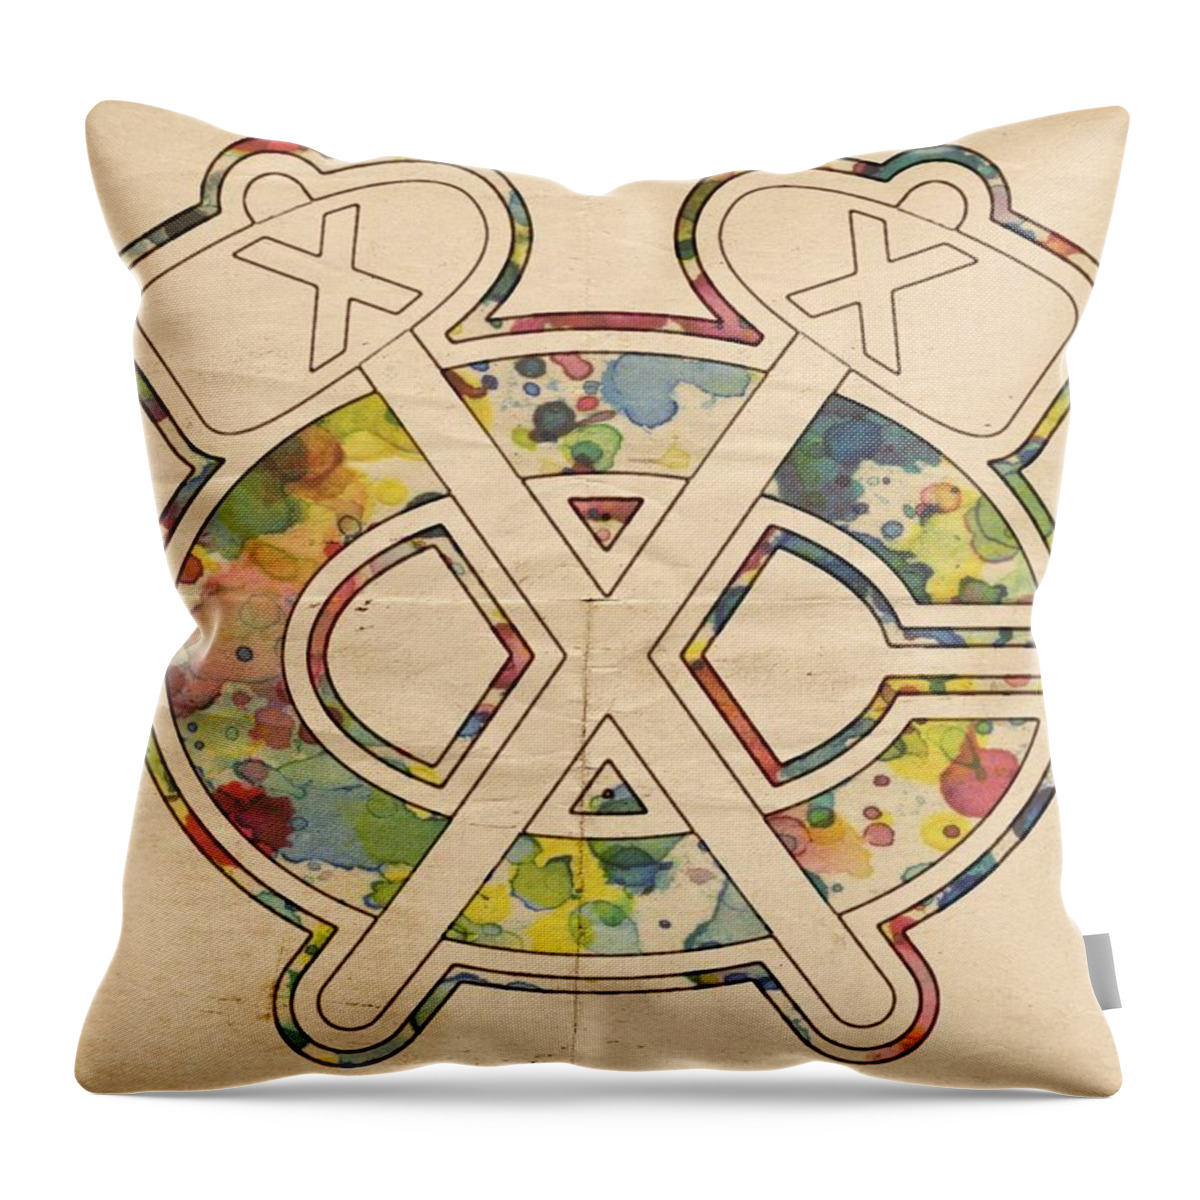 Chicago Blackhawks Throw Pillow featuring the painting Chicago Blackhawks Vintage Art by Florian Rodarte